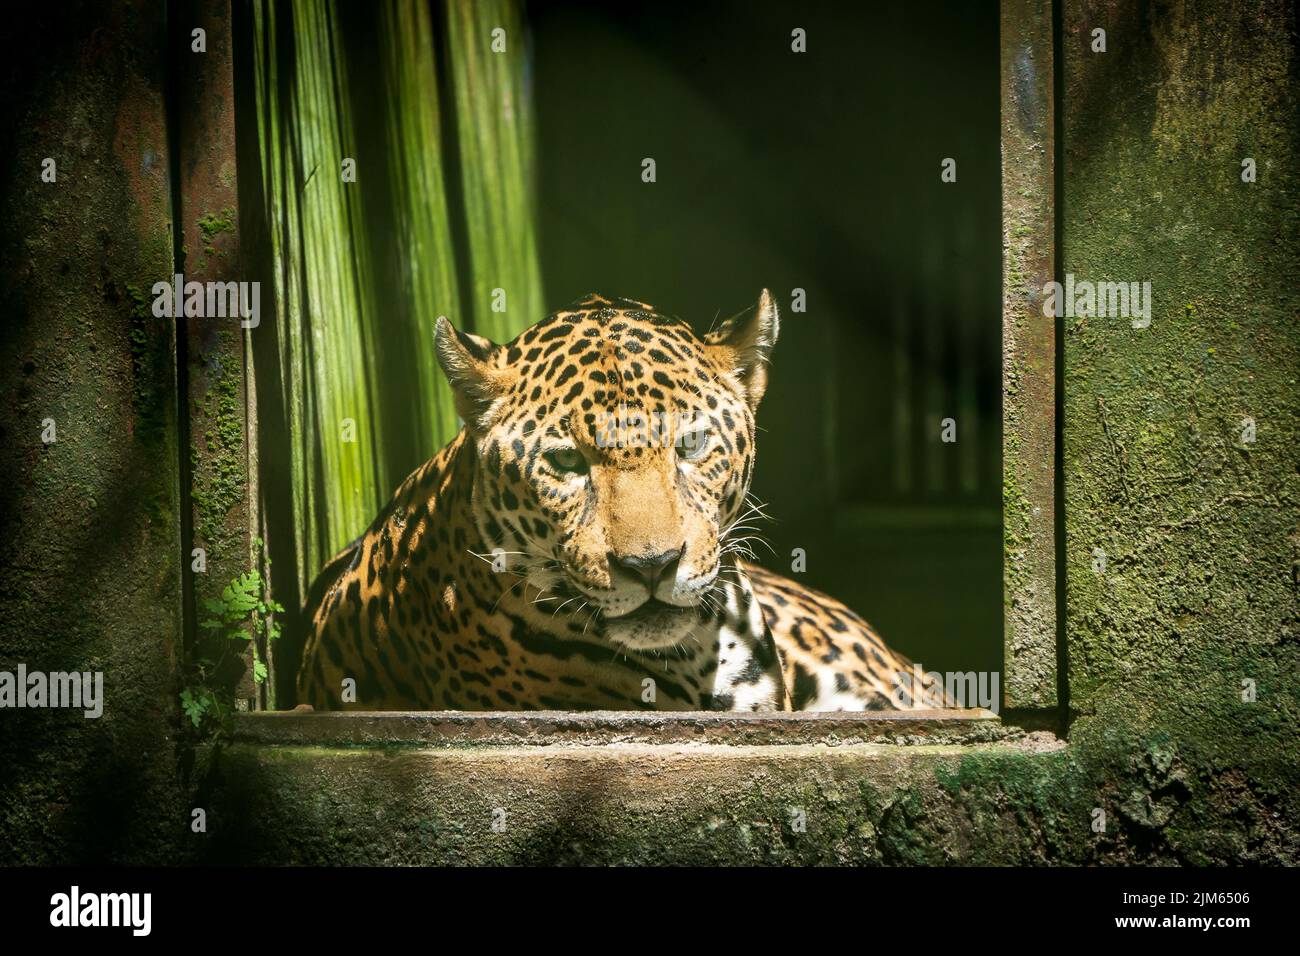 Much of the wildlife at Quistococha Zoo in Iquitos, Peru is rescued from the pet trade. Pictured here is the leopard (Panthera onca). Stock Photo